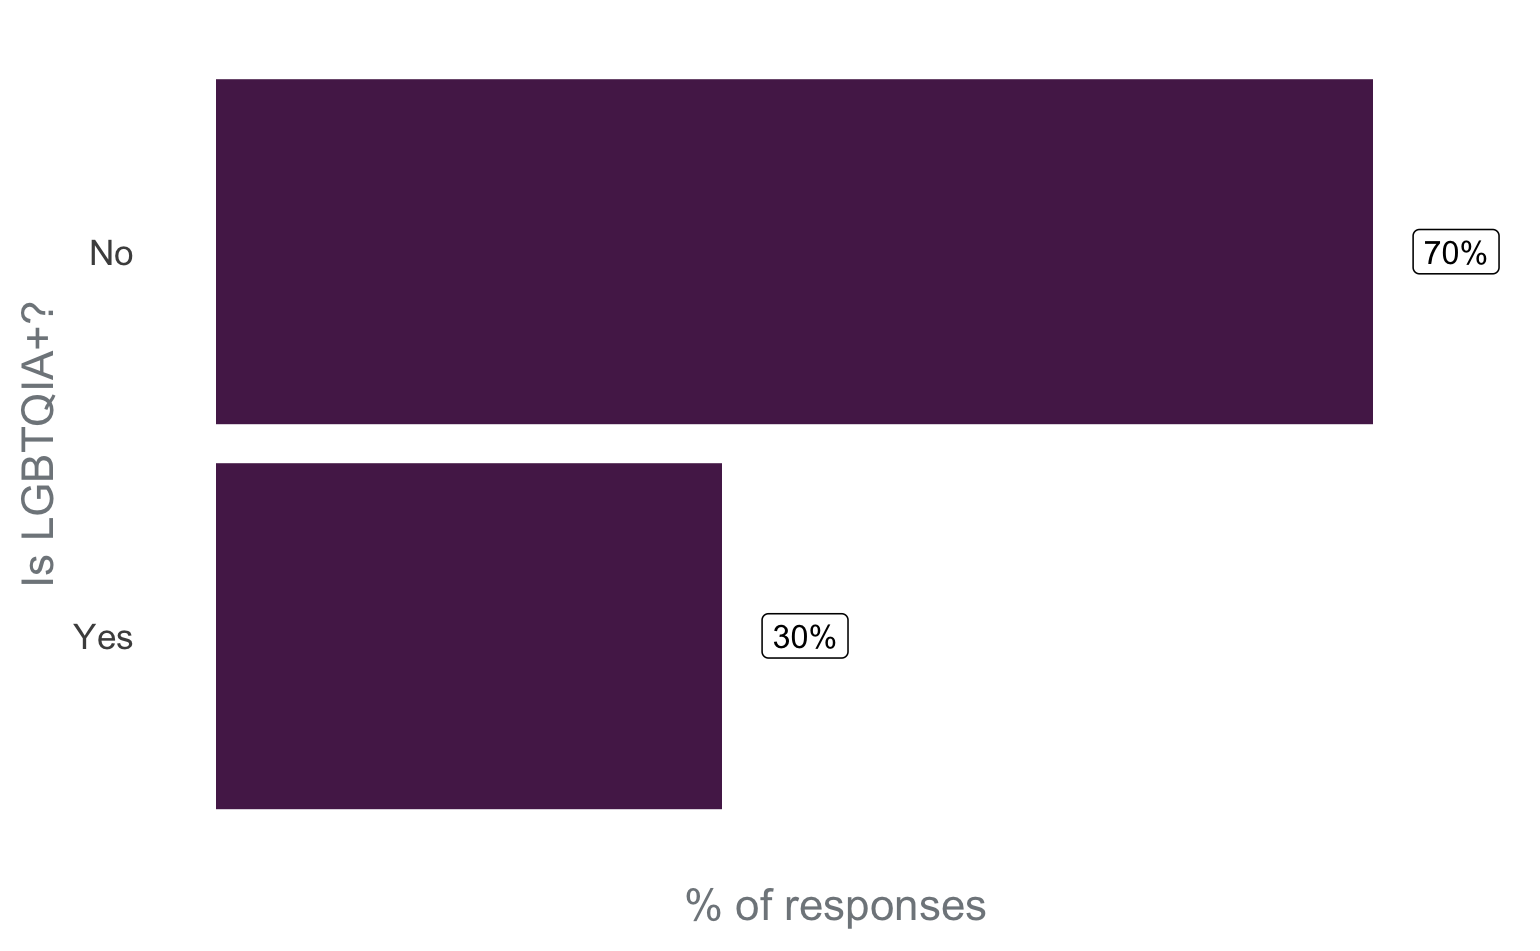 Bar chart where the X axis shows the percentage of respondents of the survey, and the Y axis represents if the person is part of the LGBTQIA+ community. Around 70% of the respondents said NO and 30% said YES.